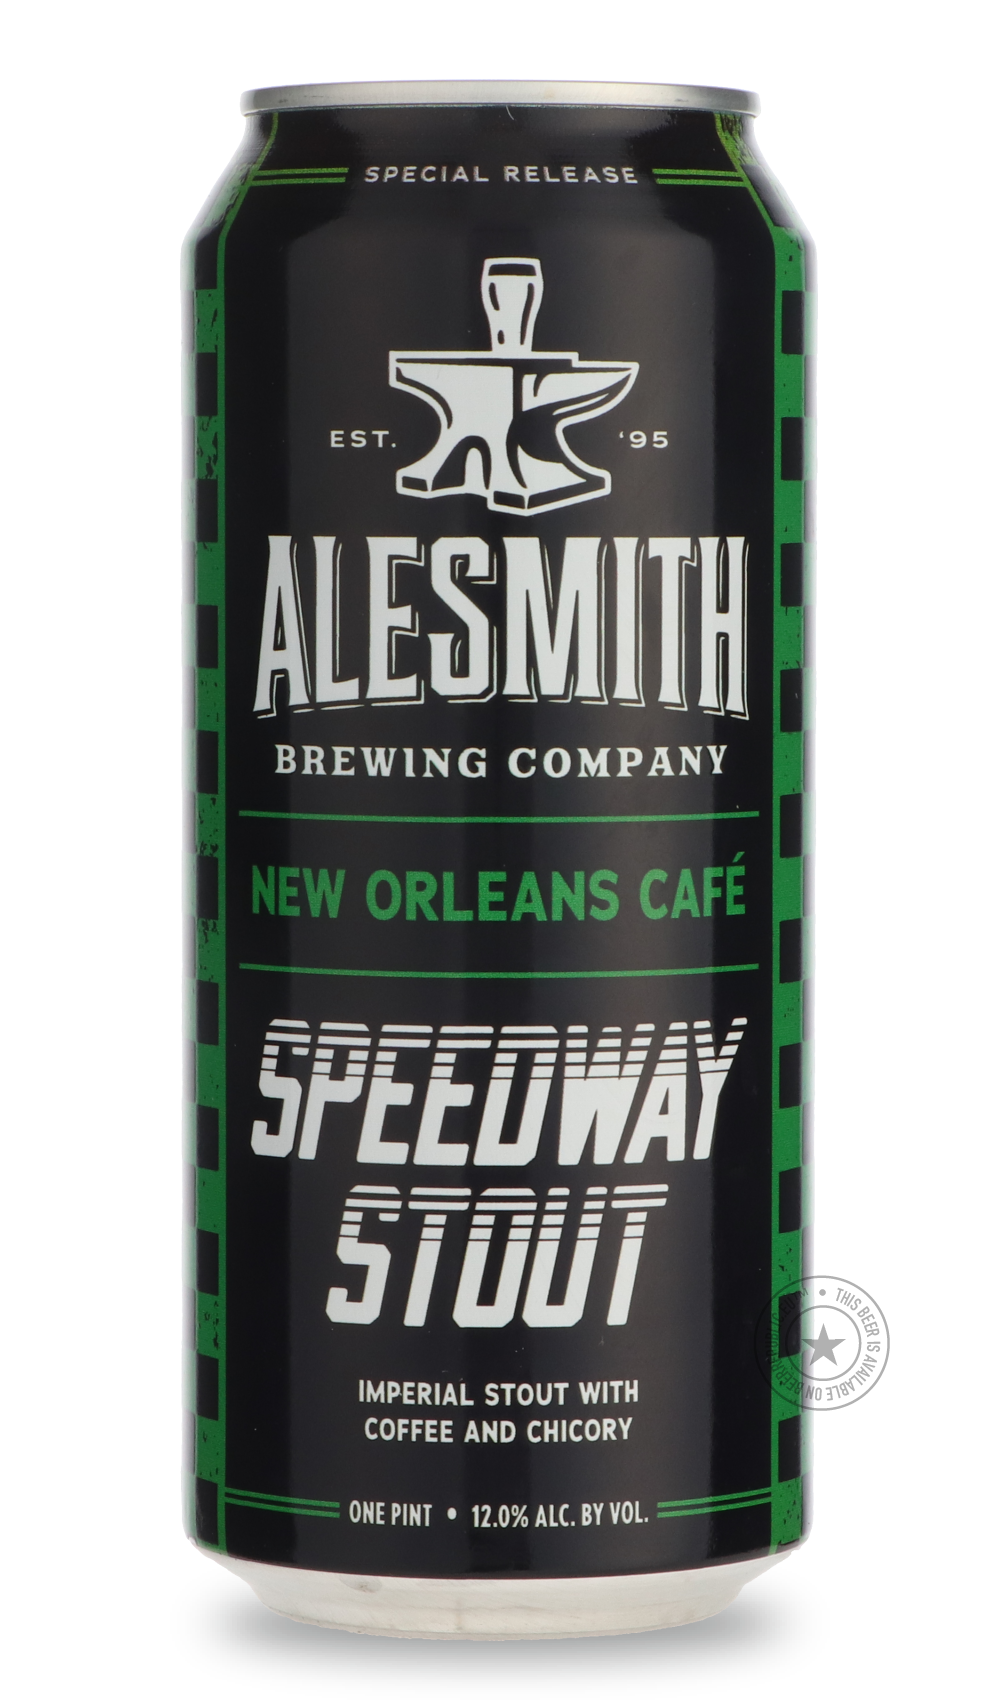 -AleSmith- Speedway Stout New Orleans Café Edition-Stout & Porter- Only @ Beer Republic - The best online beer store for American & Canadian craft beer - Buy beer online from the USA and Canada - Bier online kopen - Amerikaans bier kopen - Craft beer store - Craft beer kopen - Amerikanisch bier kaufen - Bier online kaufen - Acheter biere online - IPA - Stout - Porter - New England IPA - Hazy IPA - Imperial Stout - Barrel Aged - Barrel Aged Imperial Stout - Brown - Dark beer - Blond - Blonde - Pilsner - Lage